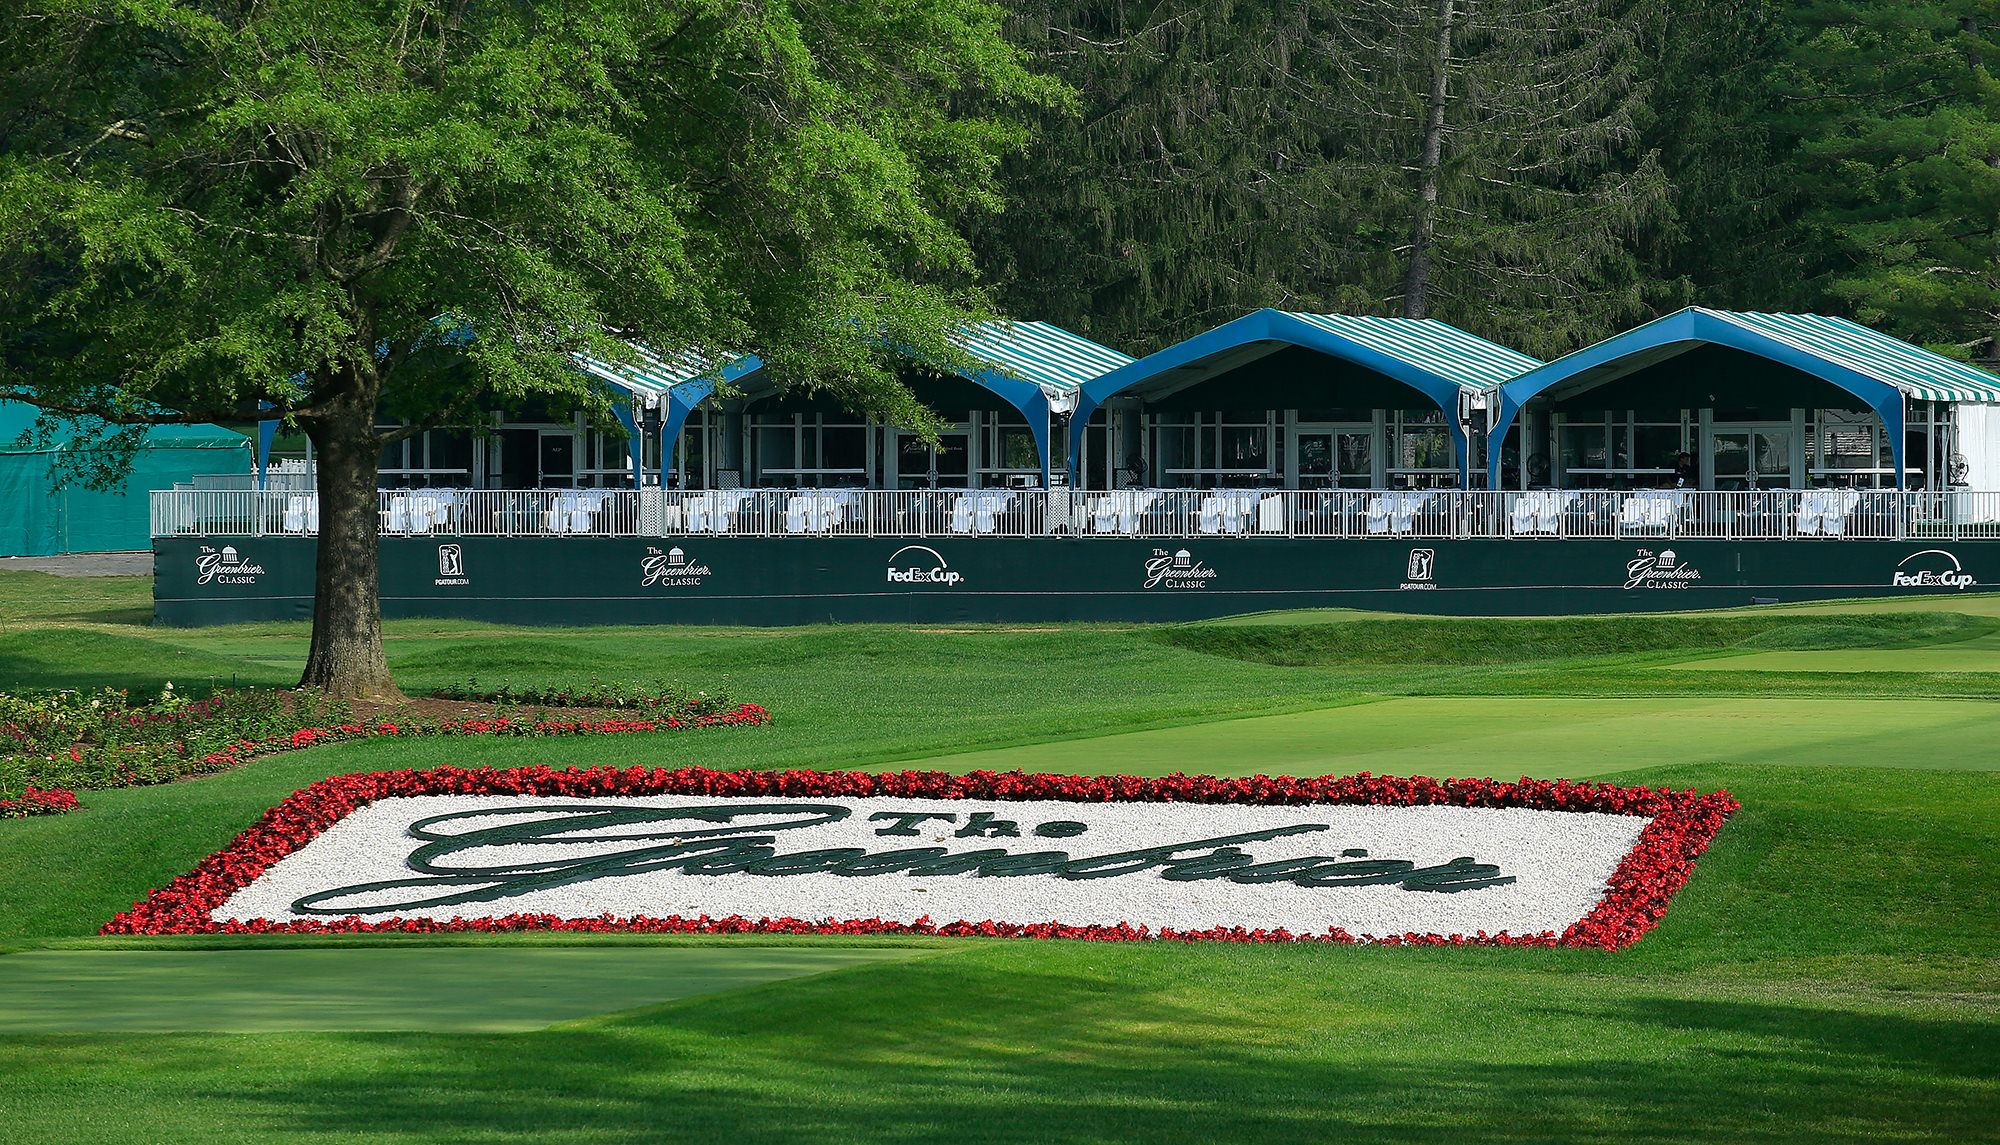 2019 Greenbrier Classic prize money